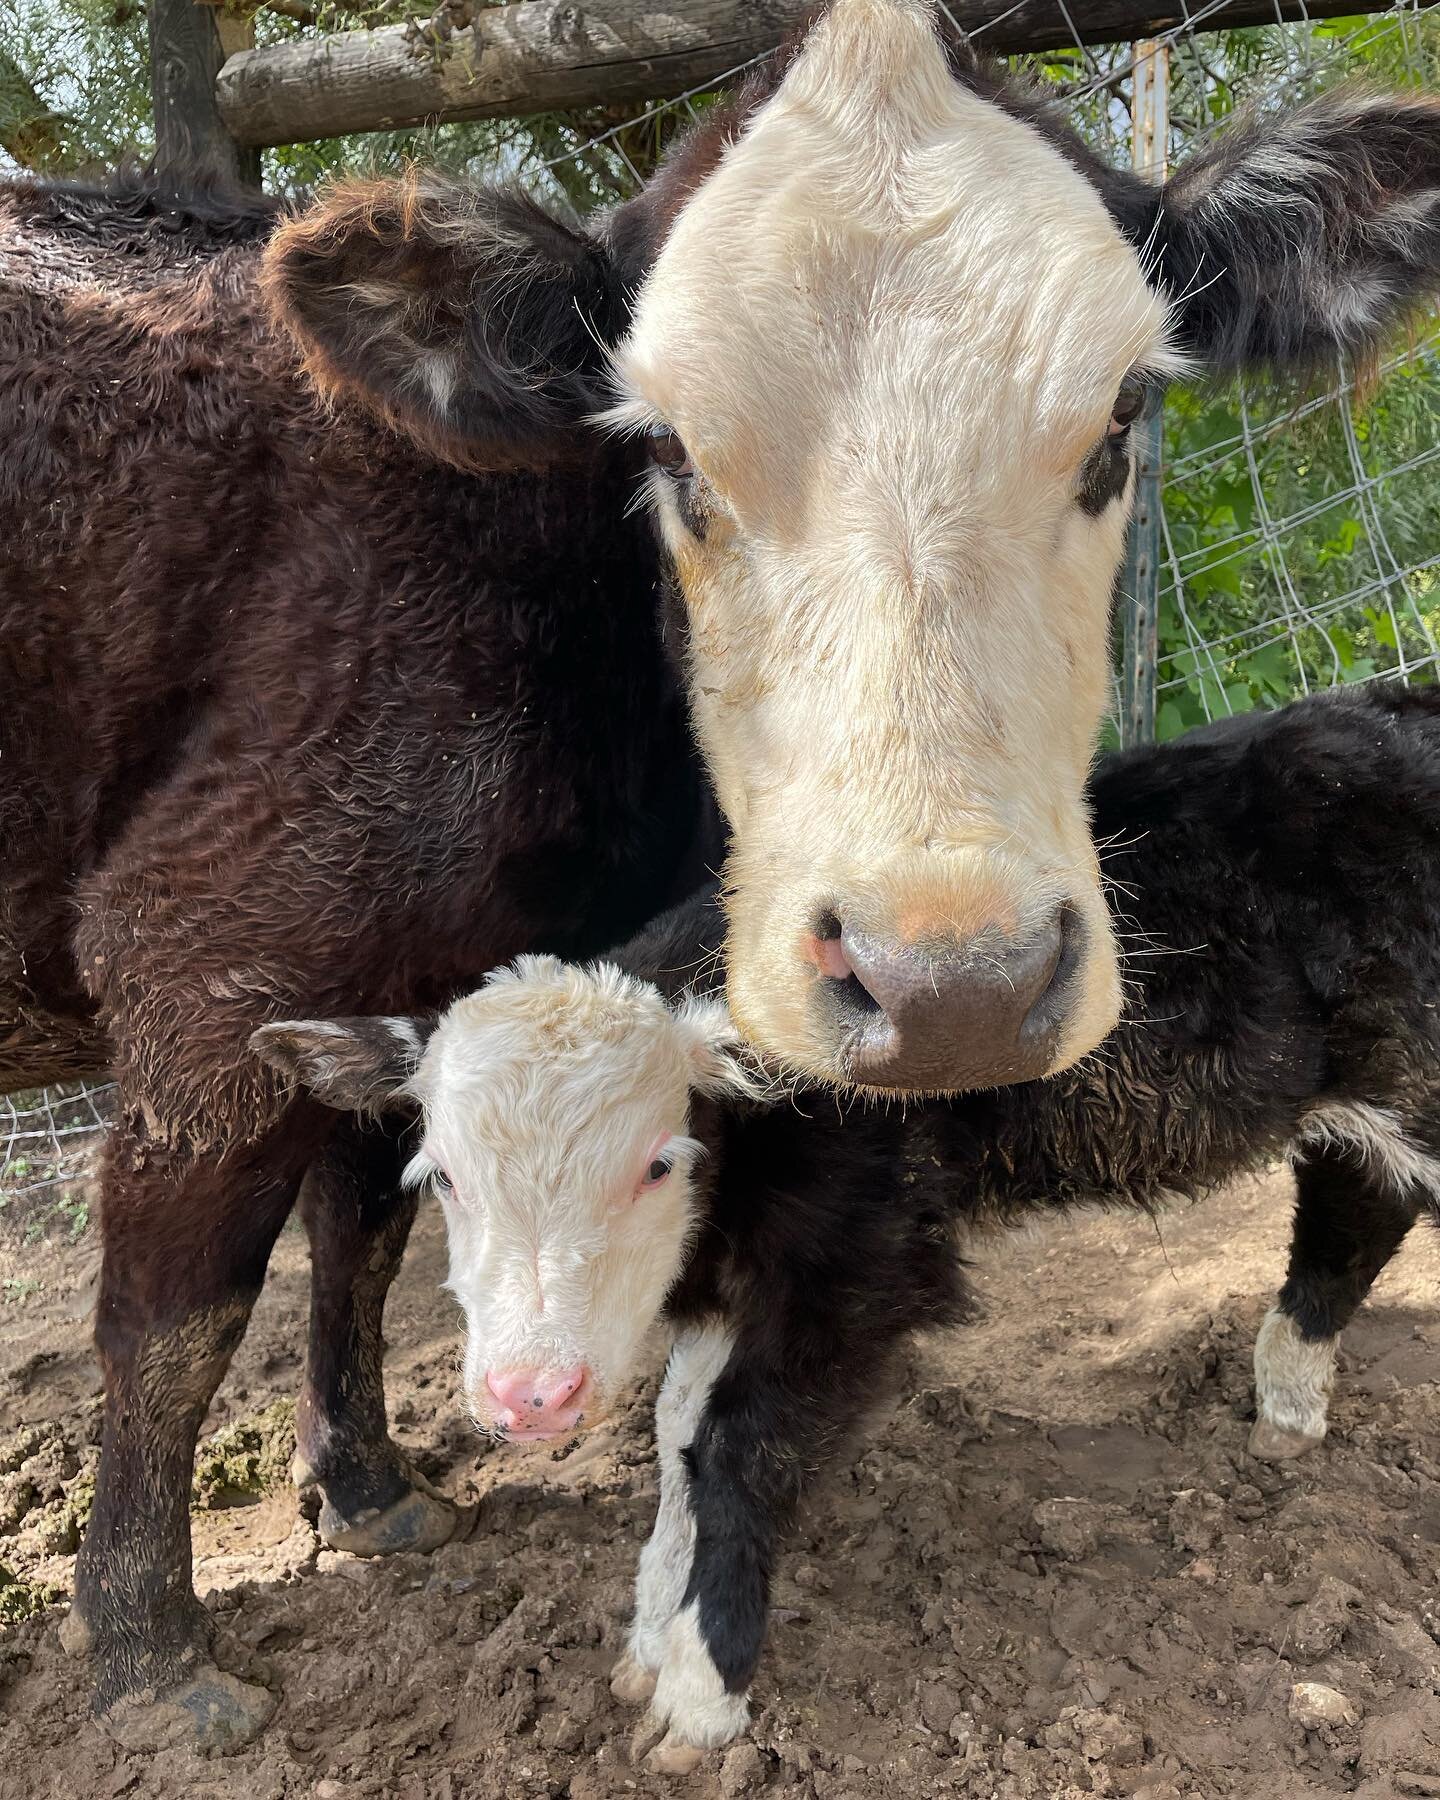 Our little Bull Calf born today🥰🐮😍🐮🥰 Your support will Help Us Corral Poverty One Head at a Time! Steerdup.org  #Steerdup #Cattle #Lowline #Herefords #Angus #Beef #Cattle #RaisingBeefForFood #FeedTheHomeless #BeefForFoodPantries #ForJesusChrist 